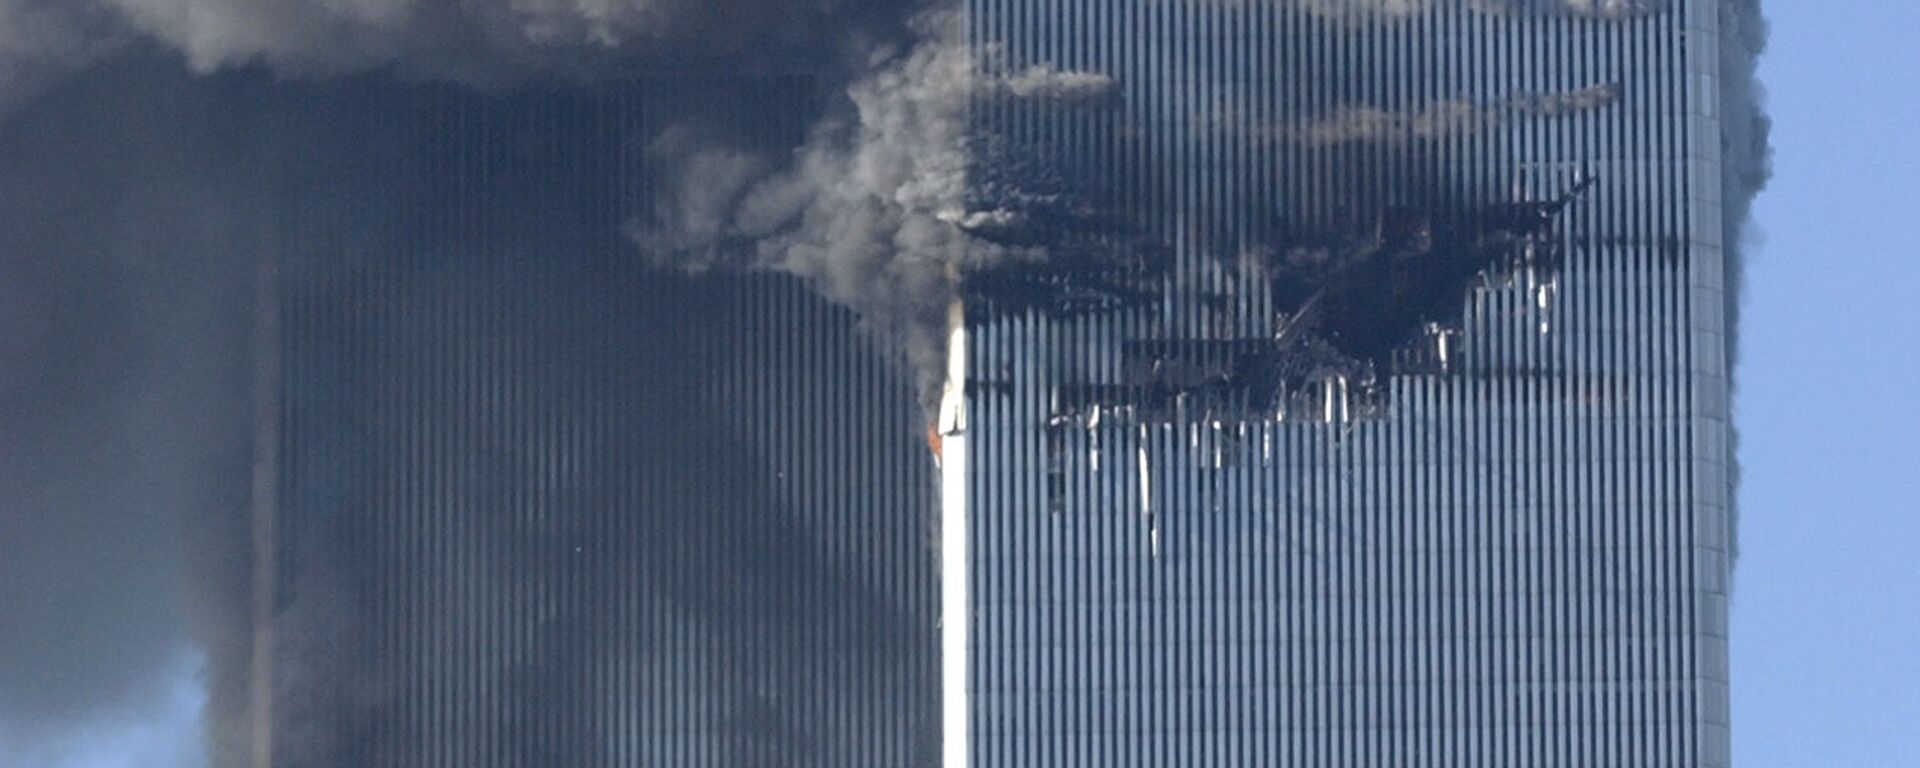 Smoke billows from the North and South Towers of the World Trade Center before they collapsed on September 11, 2001 in New York, NY - Sputnik International, 1920, 17.07.2021